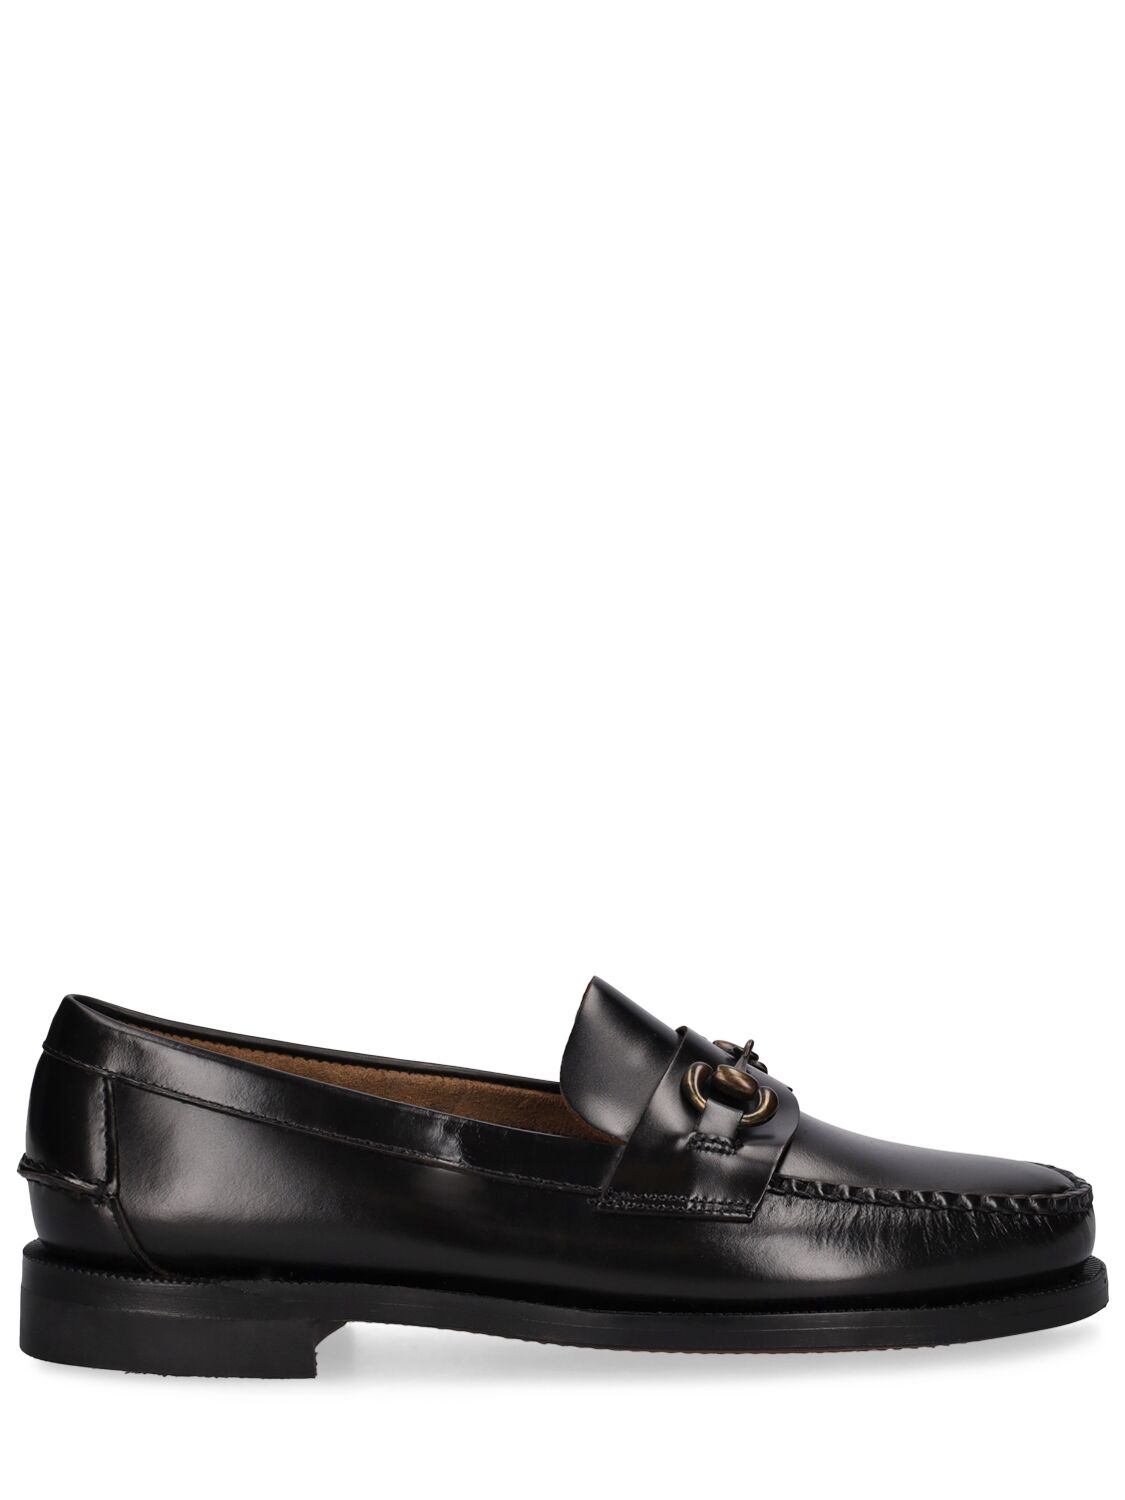 Image of Classic Joe Brushed Leather Loafers